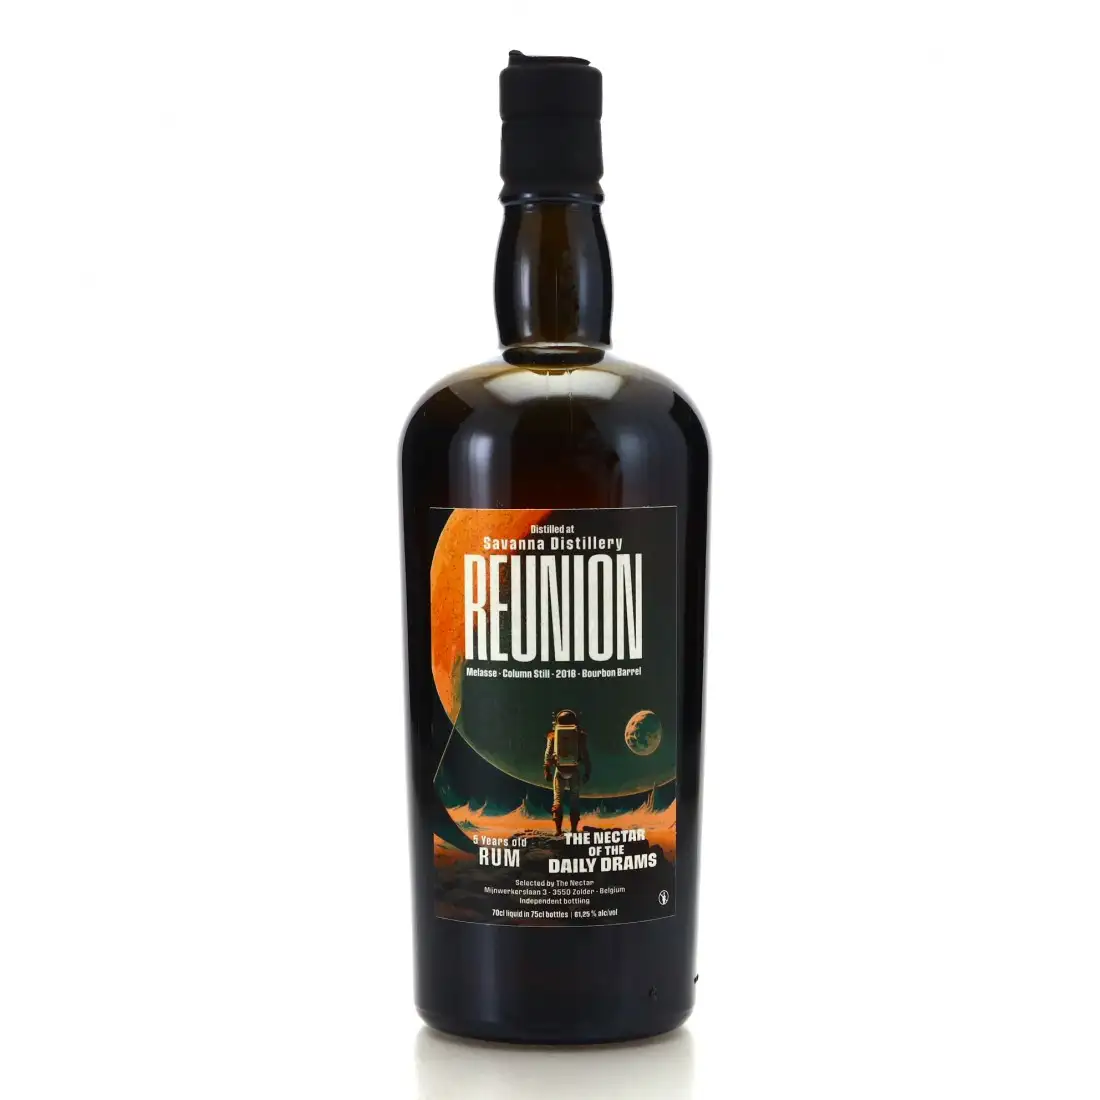 Image of the front of the bottle of the rum The Nectar Of The Daily Drams Reunion